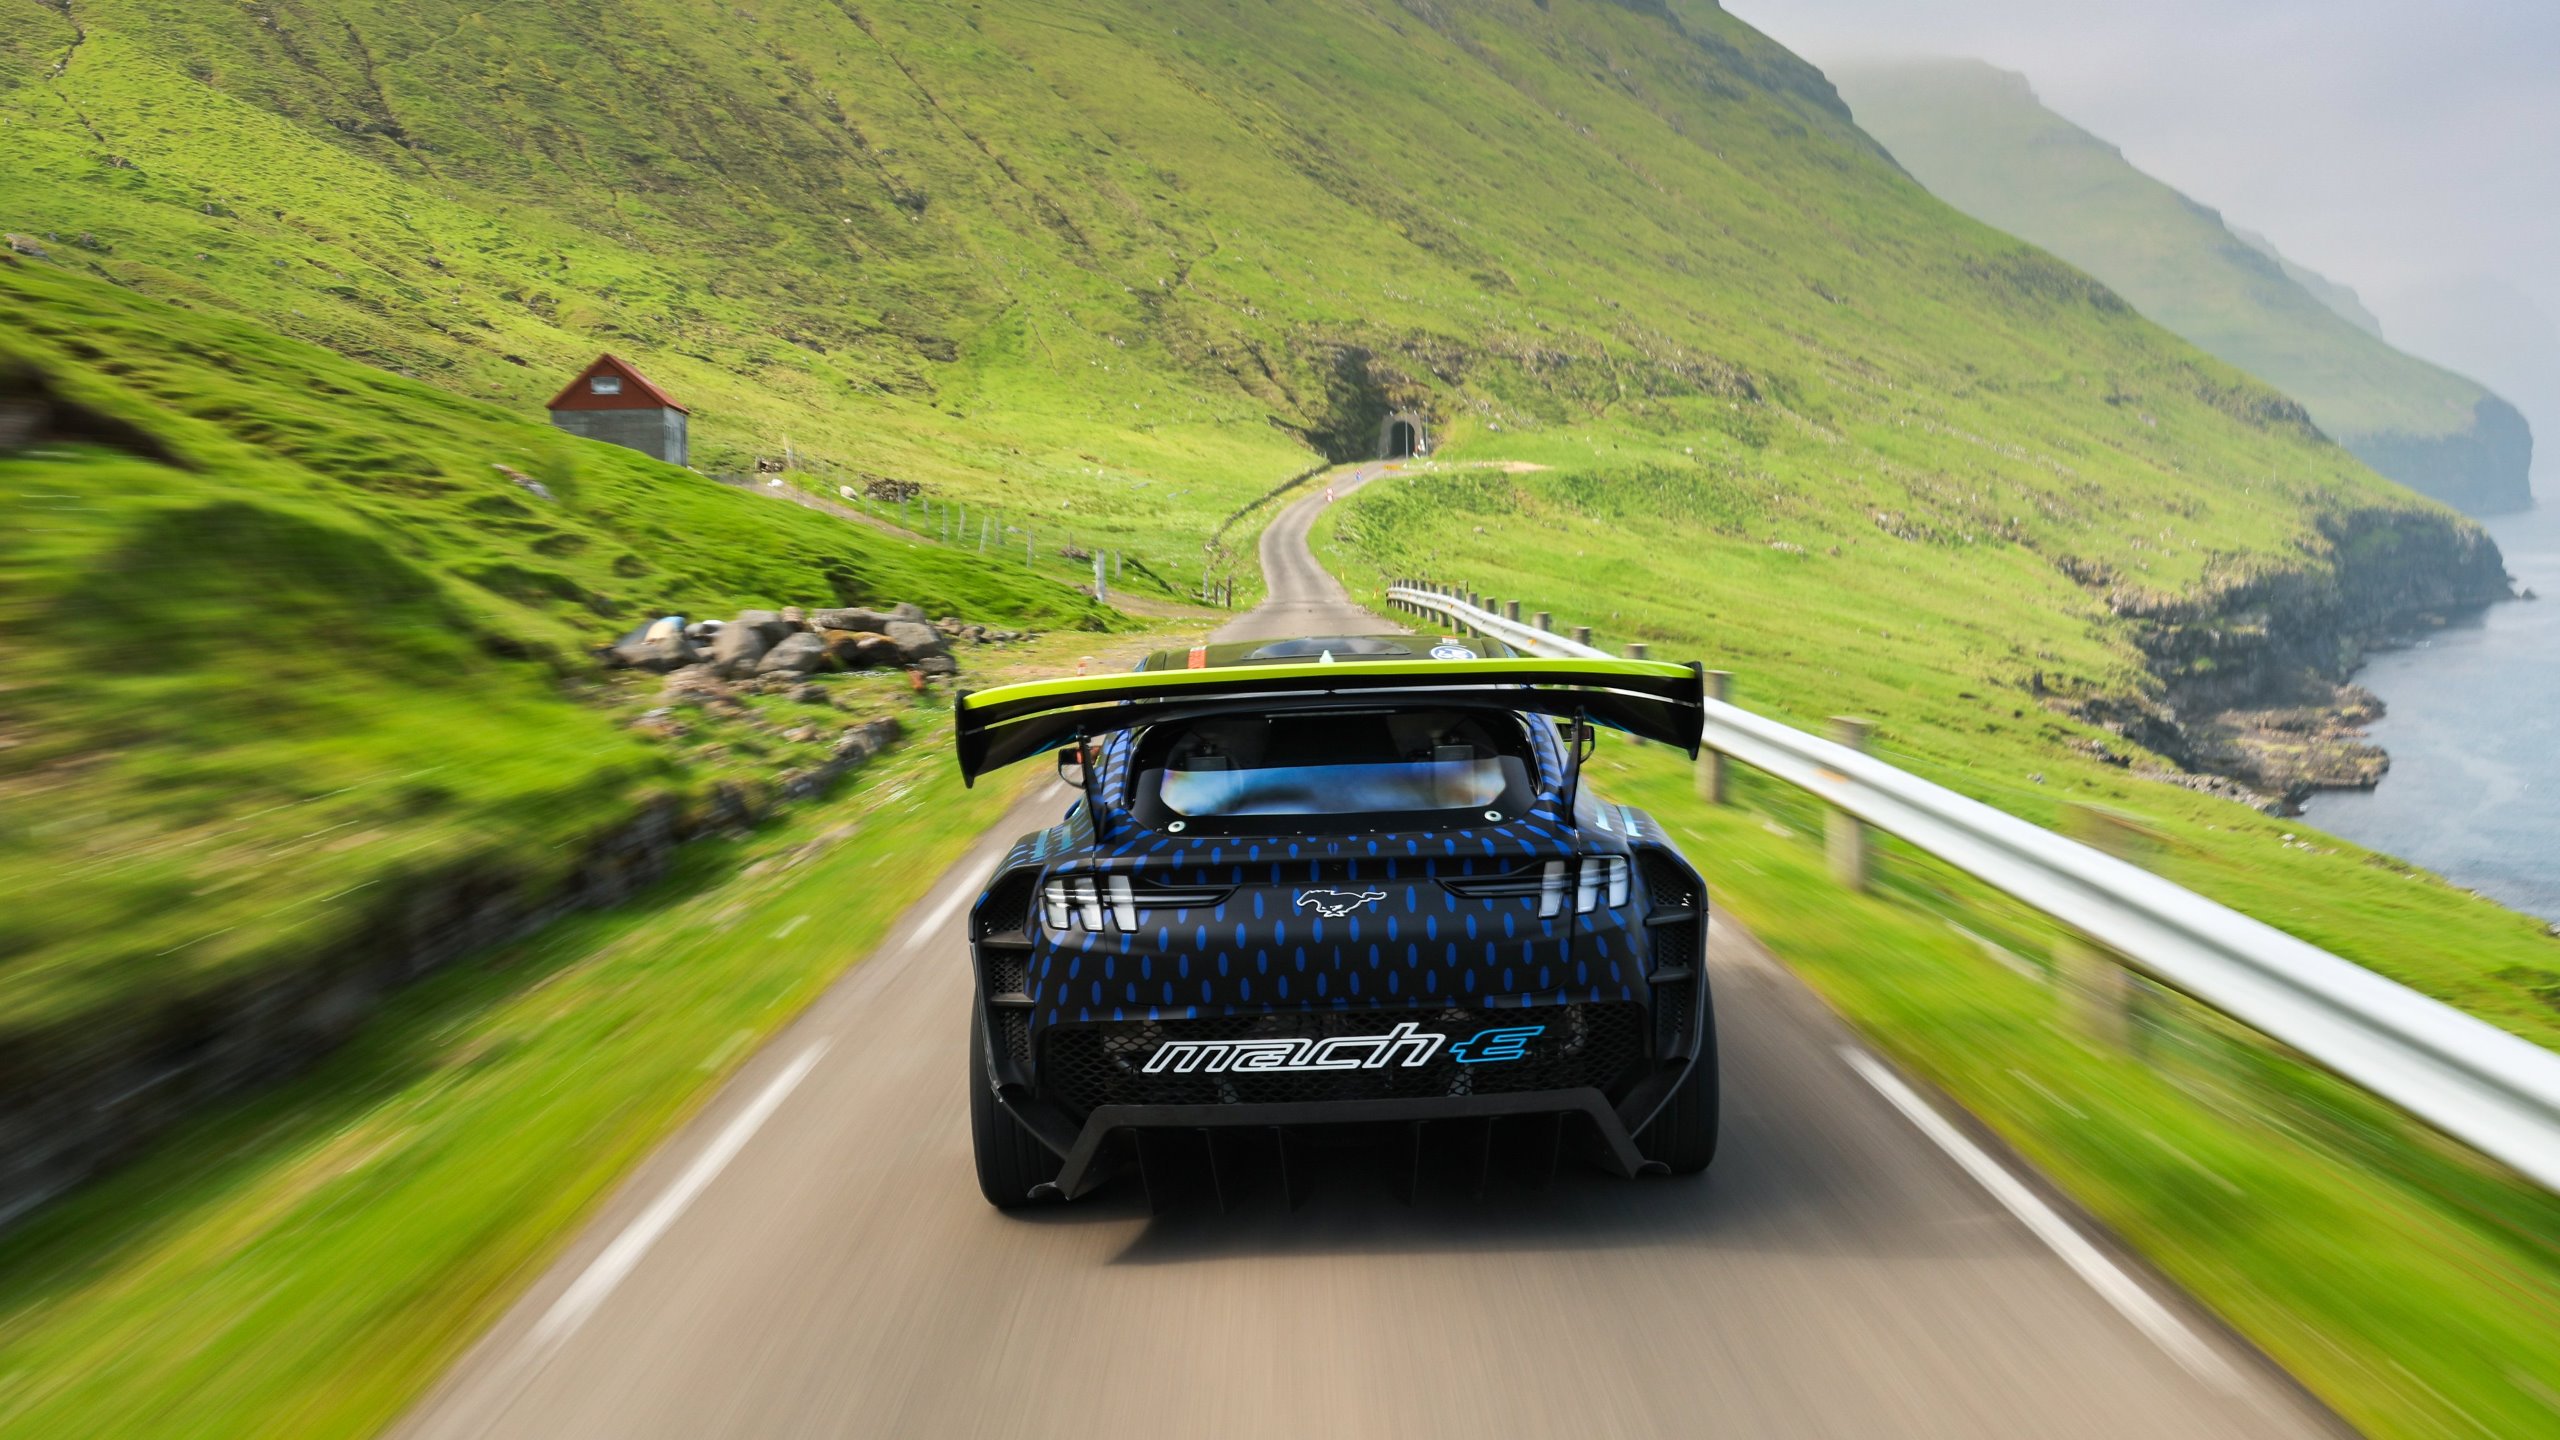 Car Vehicle Landscape Road Asphalt Black Cars Ford Mountains Long Road Rear View Ford Mustang Mach E 2560x1440